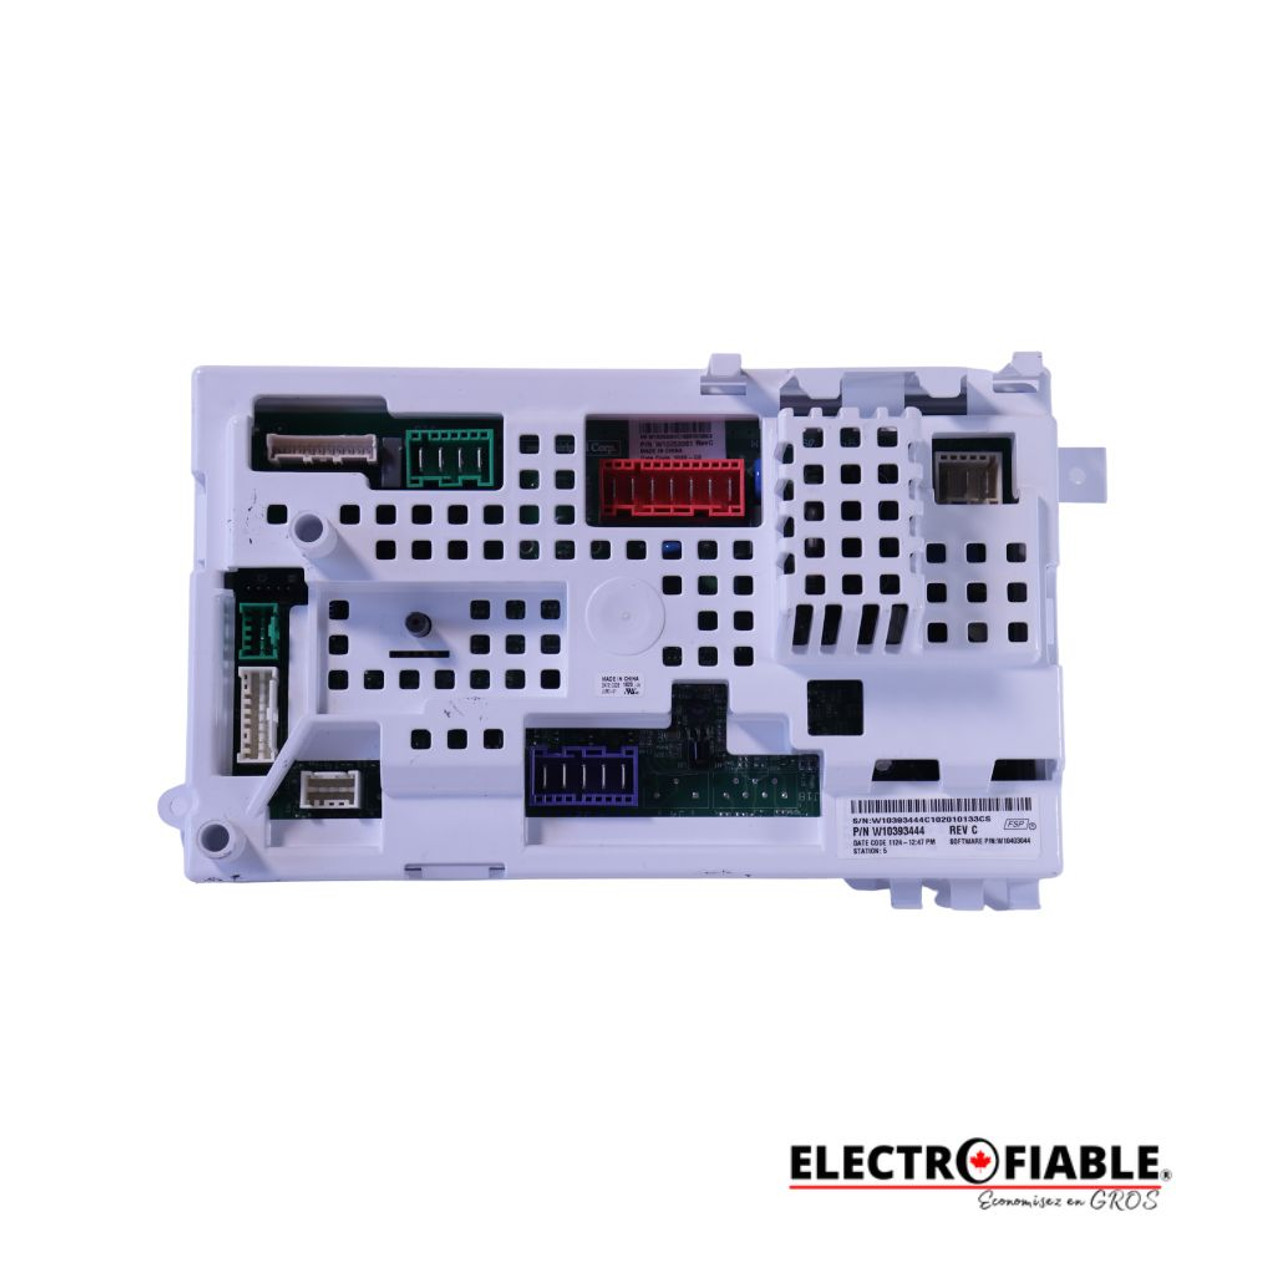 Electronic control board for Whirlpool W10393444  washer